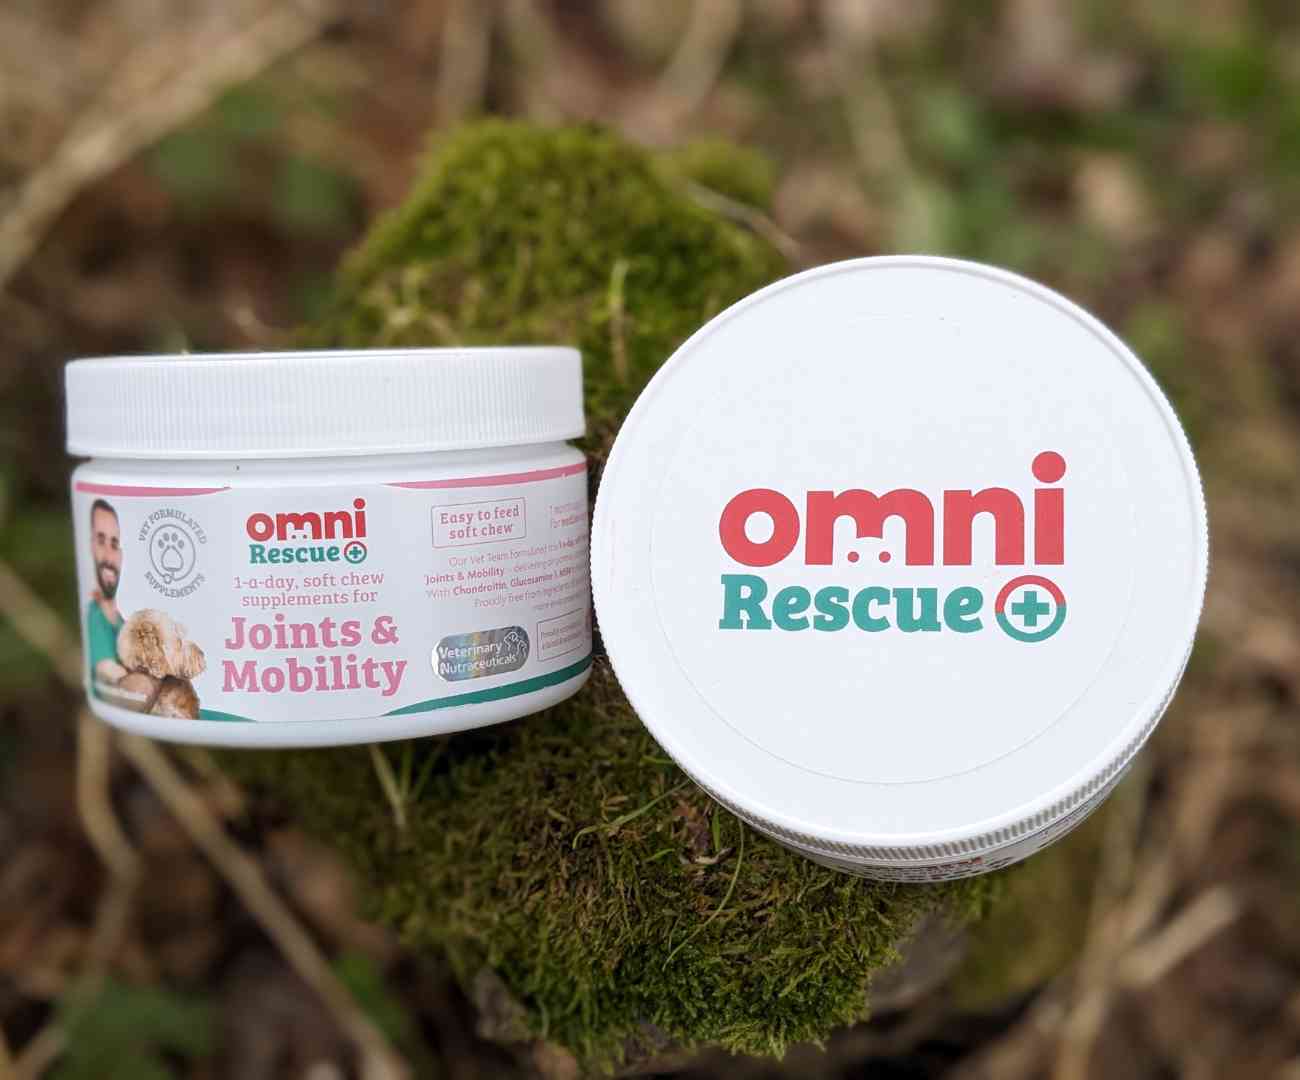 2 white plastic tubs resting on a moss covered tree stump. Both contain Omni dog supplements and are branded with the logo 'Omni Rescue'. 1 of the tubs is lying on its side, showing the logo and contents clearly, the other is with the top of the lid facing upwards, with the Omni Rescue branding in large letters